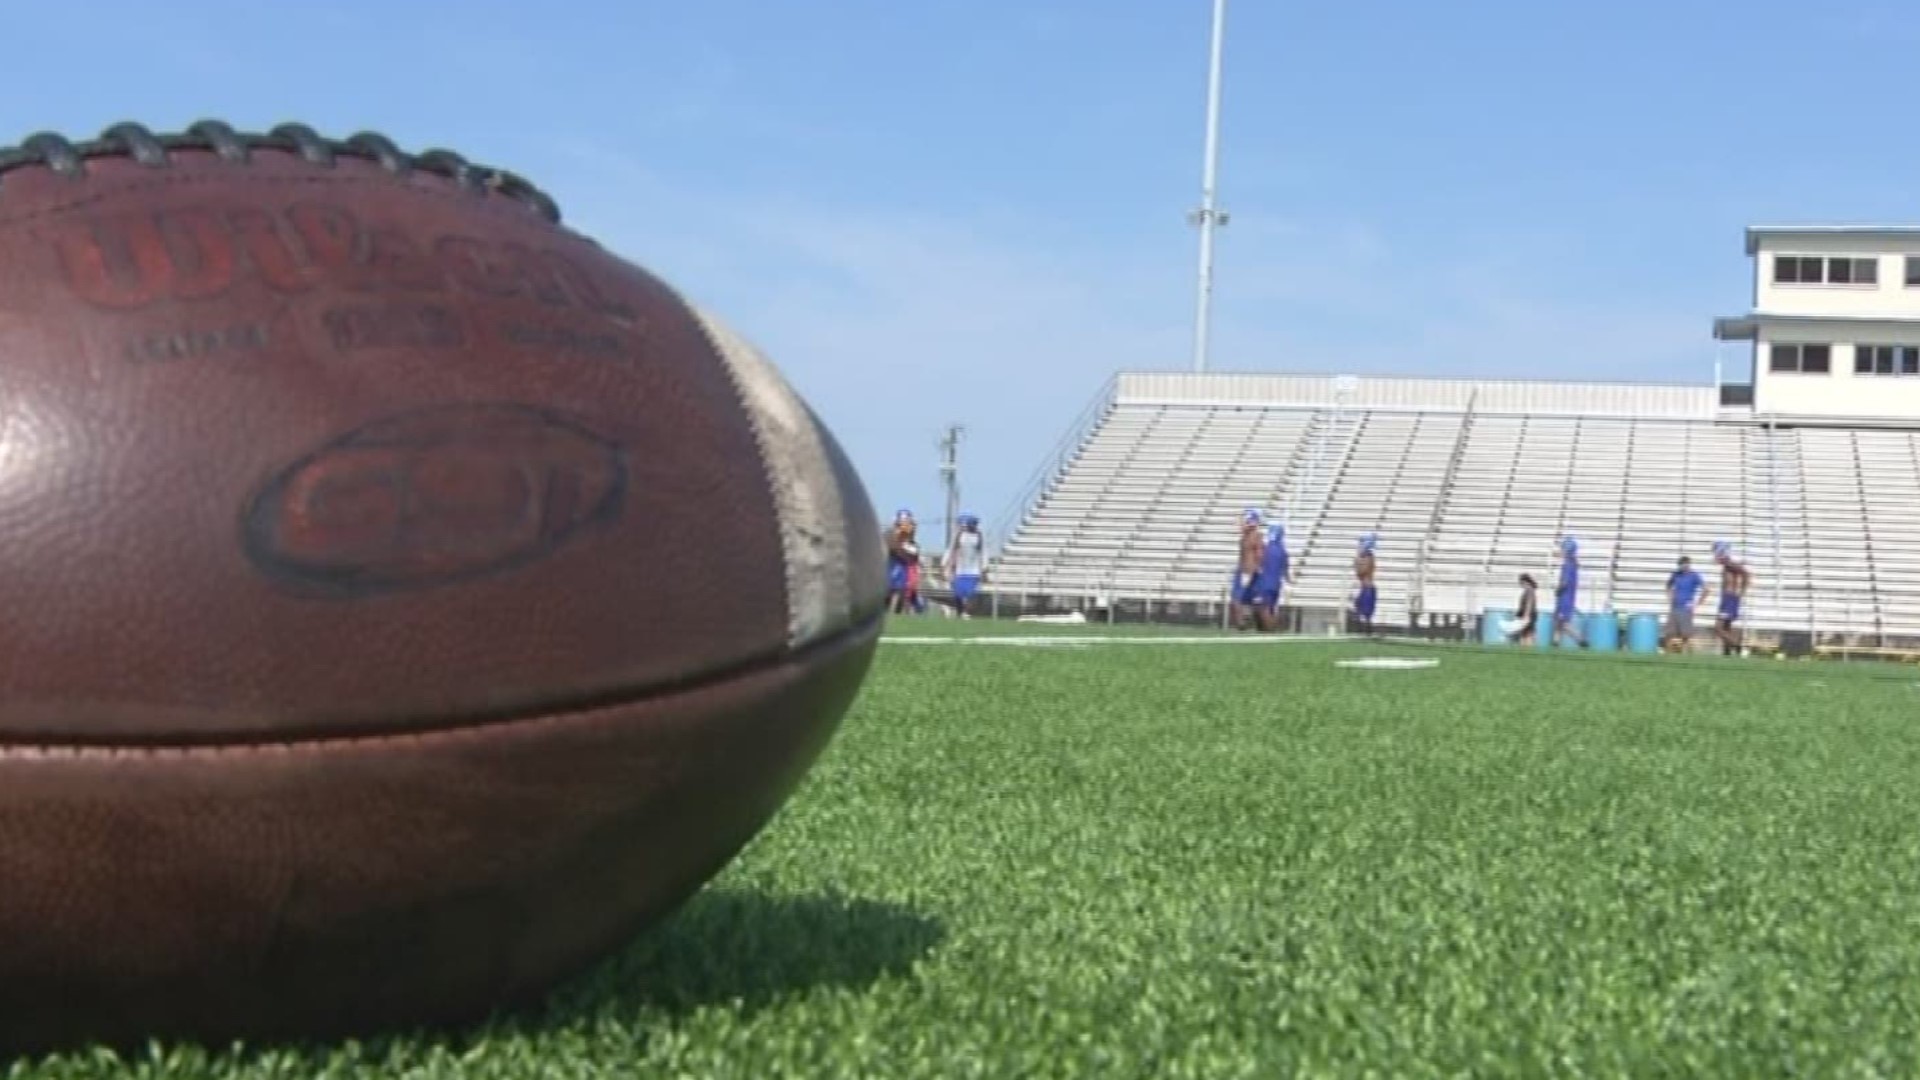 Although football starts tomorrow, it'll look a bit different. Local coaches talk about how they will adjust to practices amid the ongoing coronavirus pandemic.